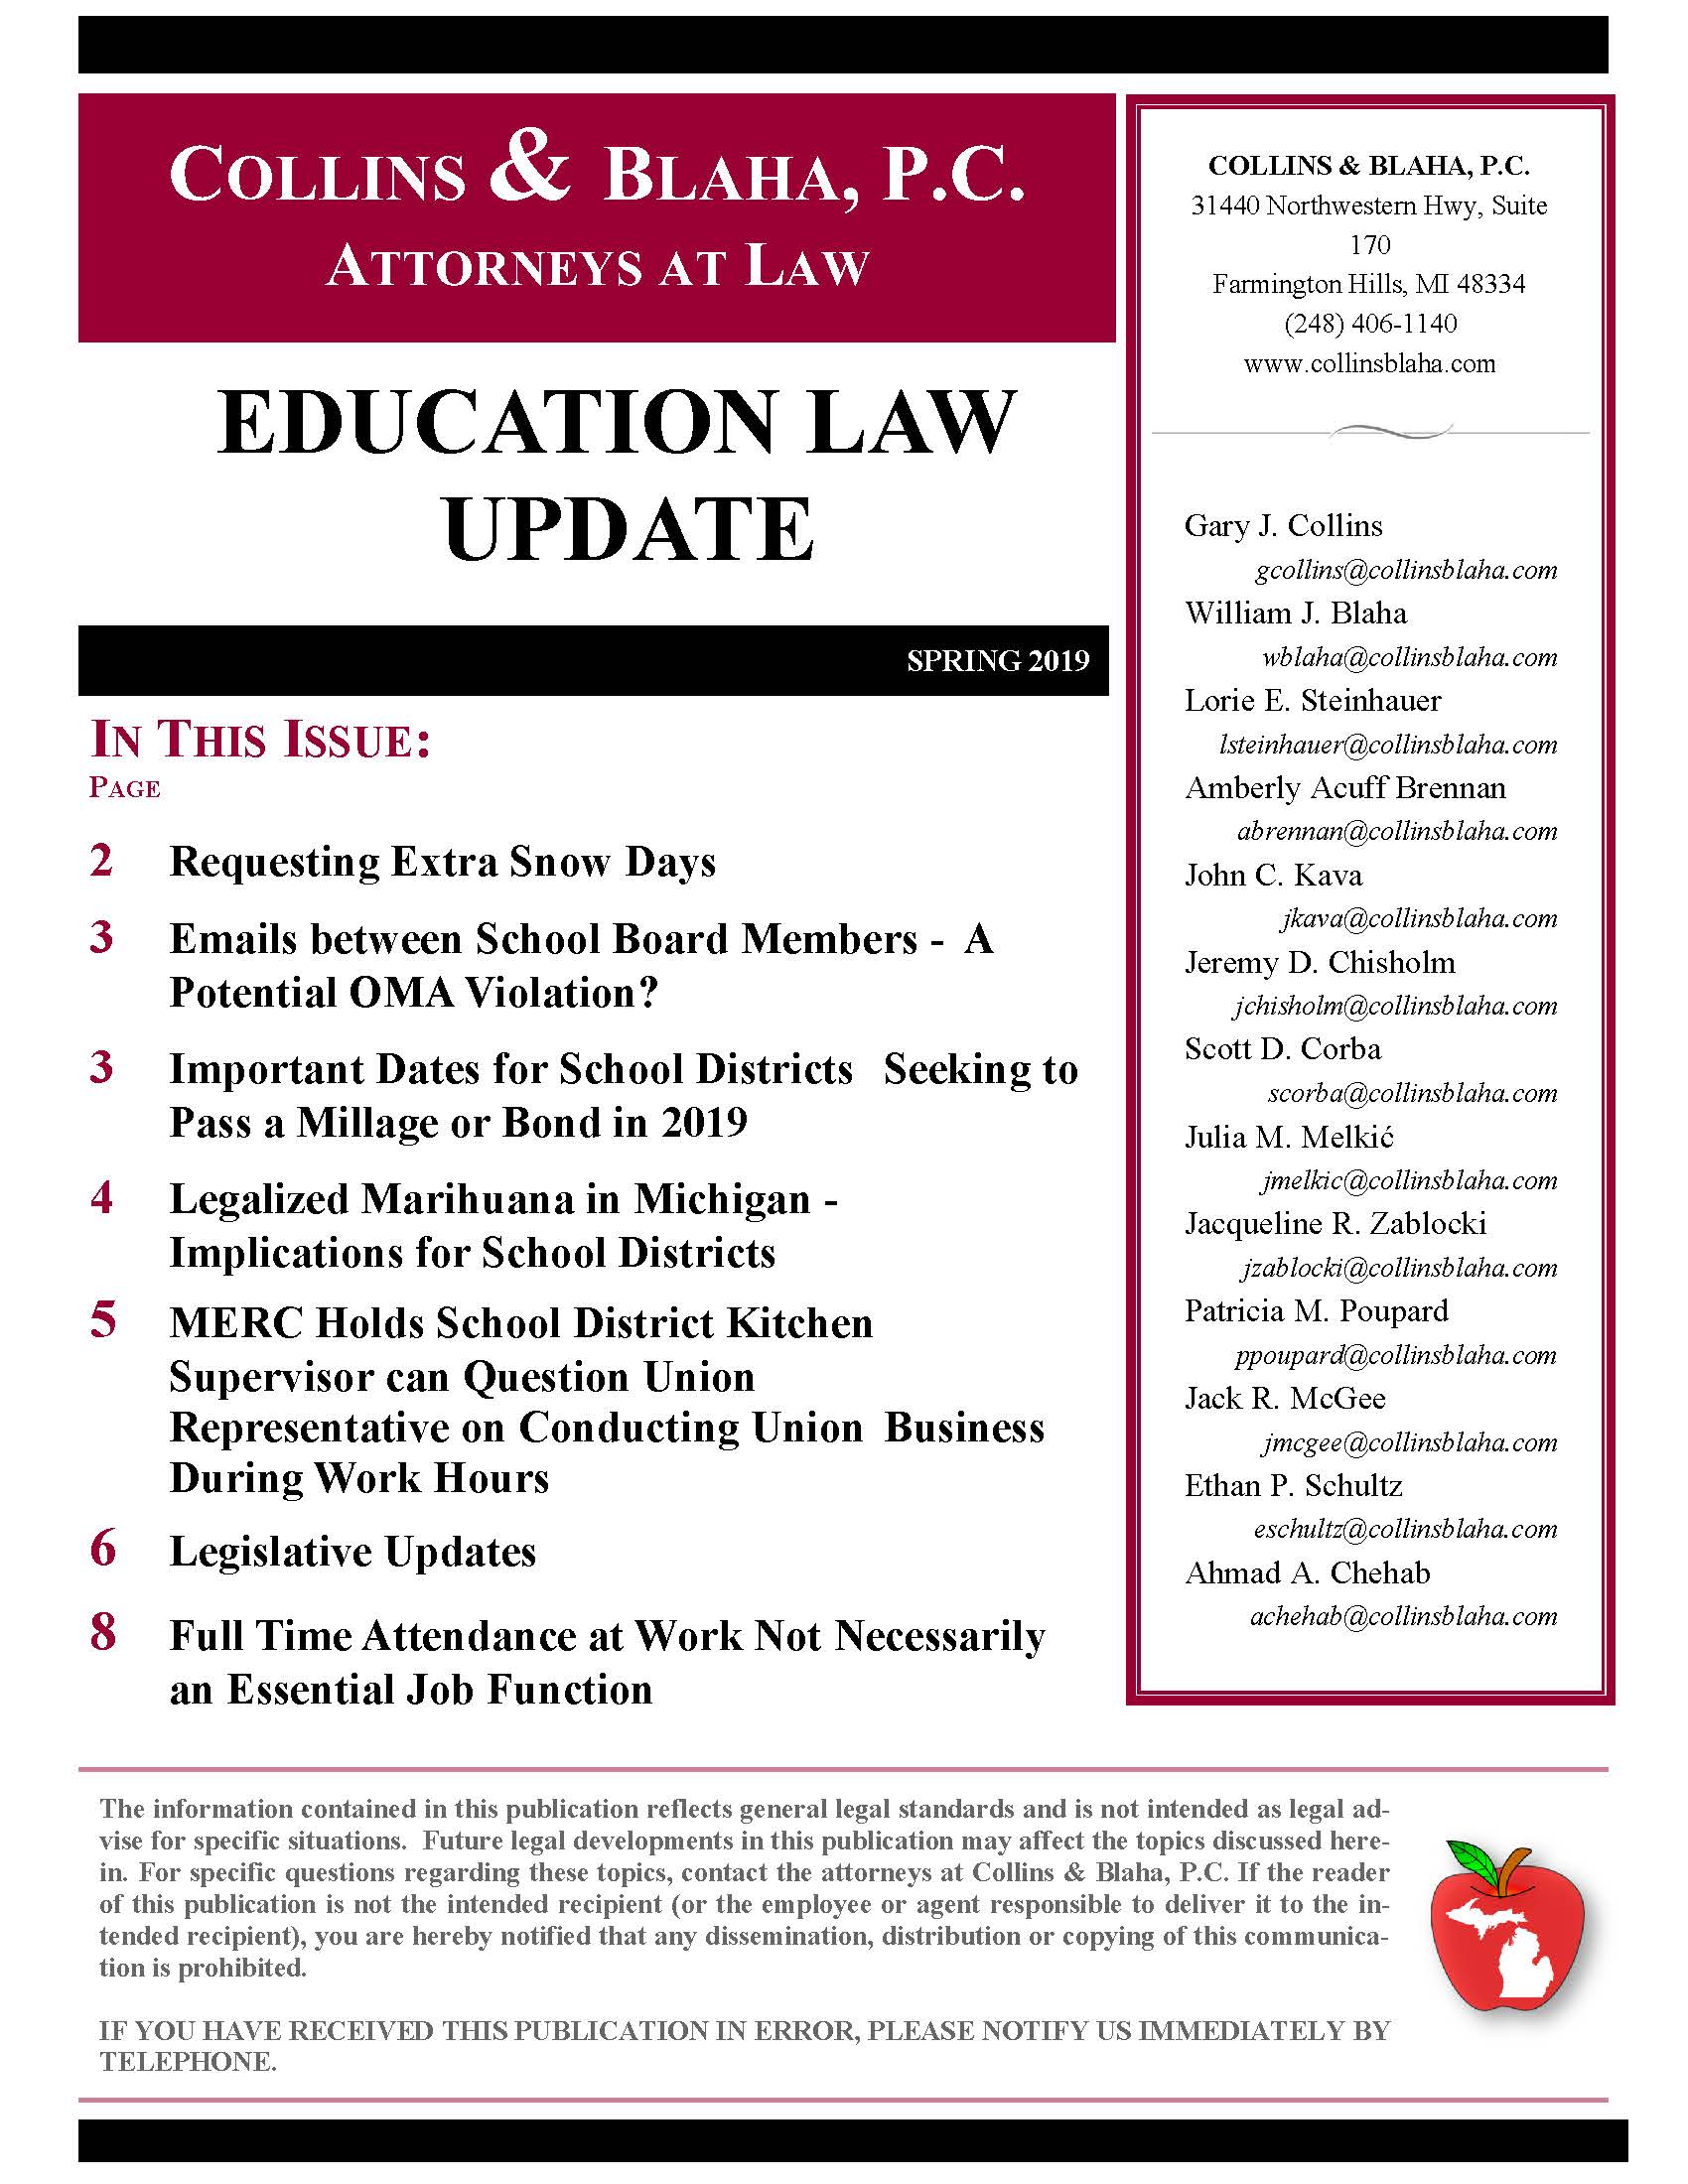 education-law-update-spring-2019_page_1